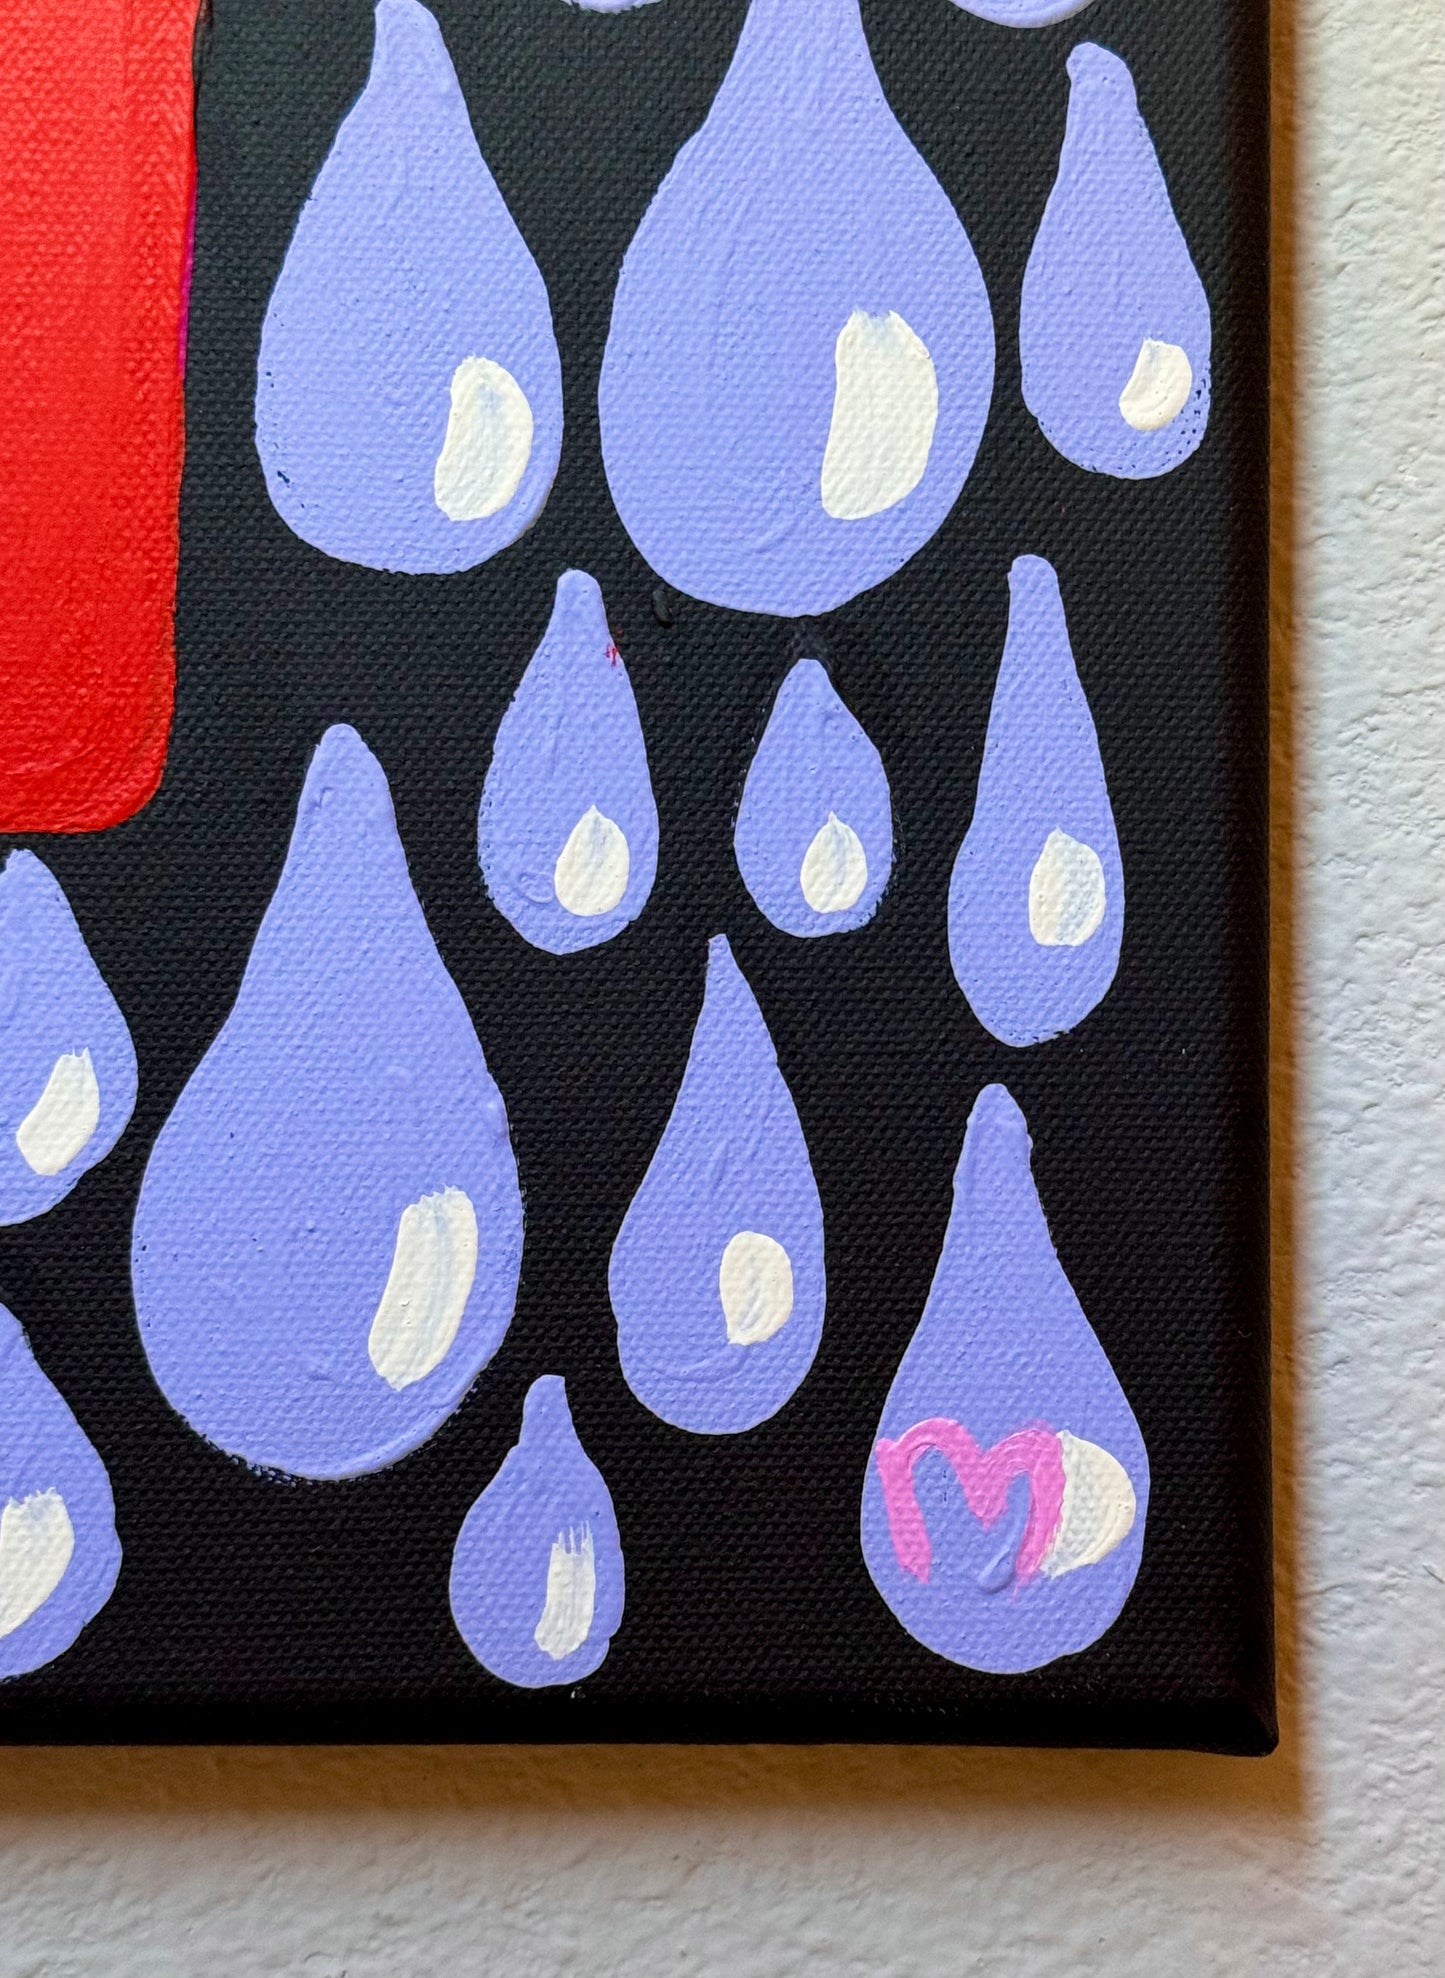 April Showers (Bring May Flowers) PAINTING